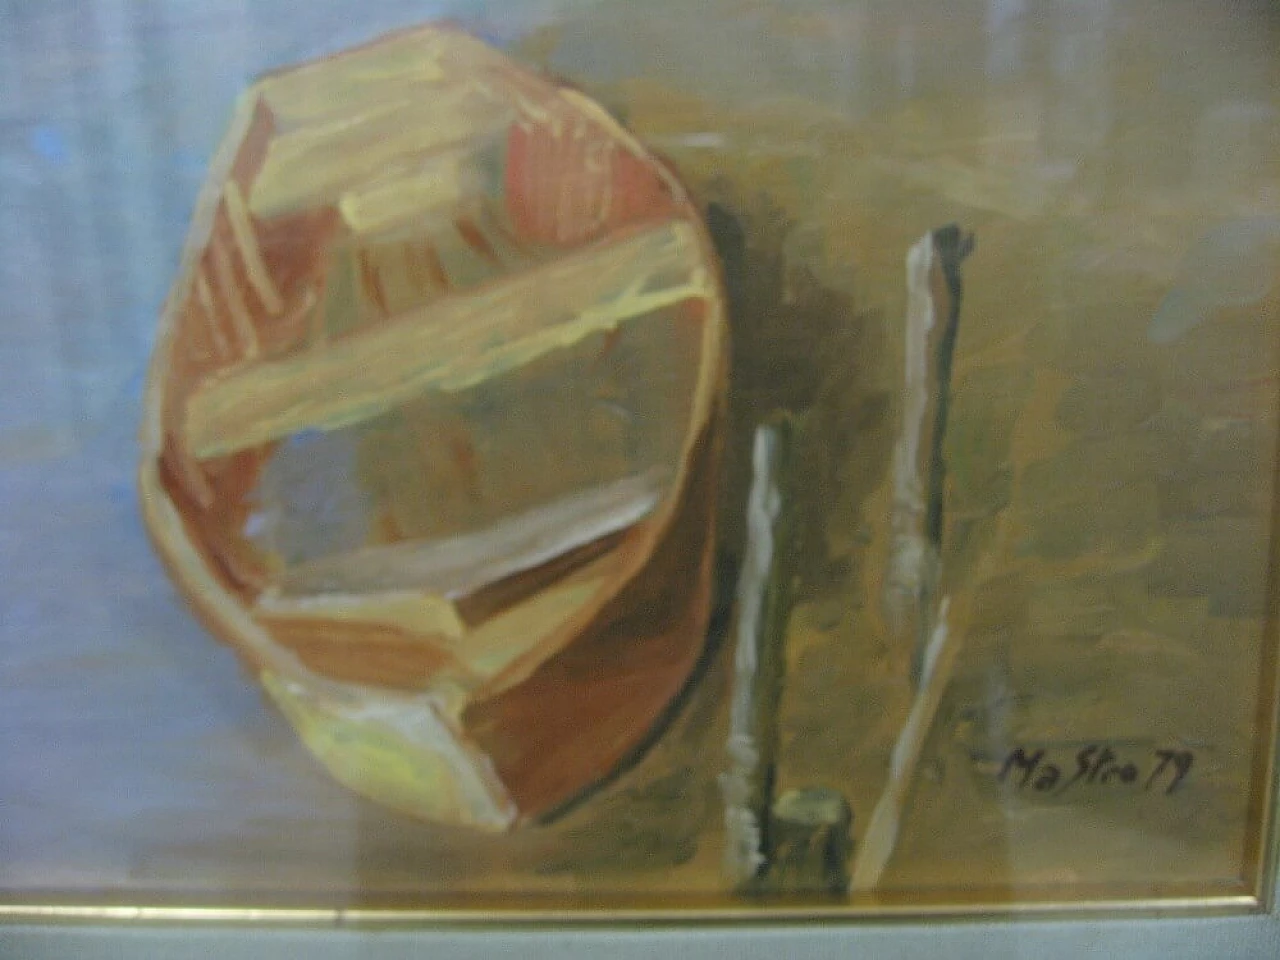 Mario Strocchi, Boat on the Rhine, oil painting on plywood, 1979 4